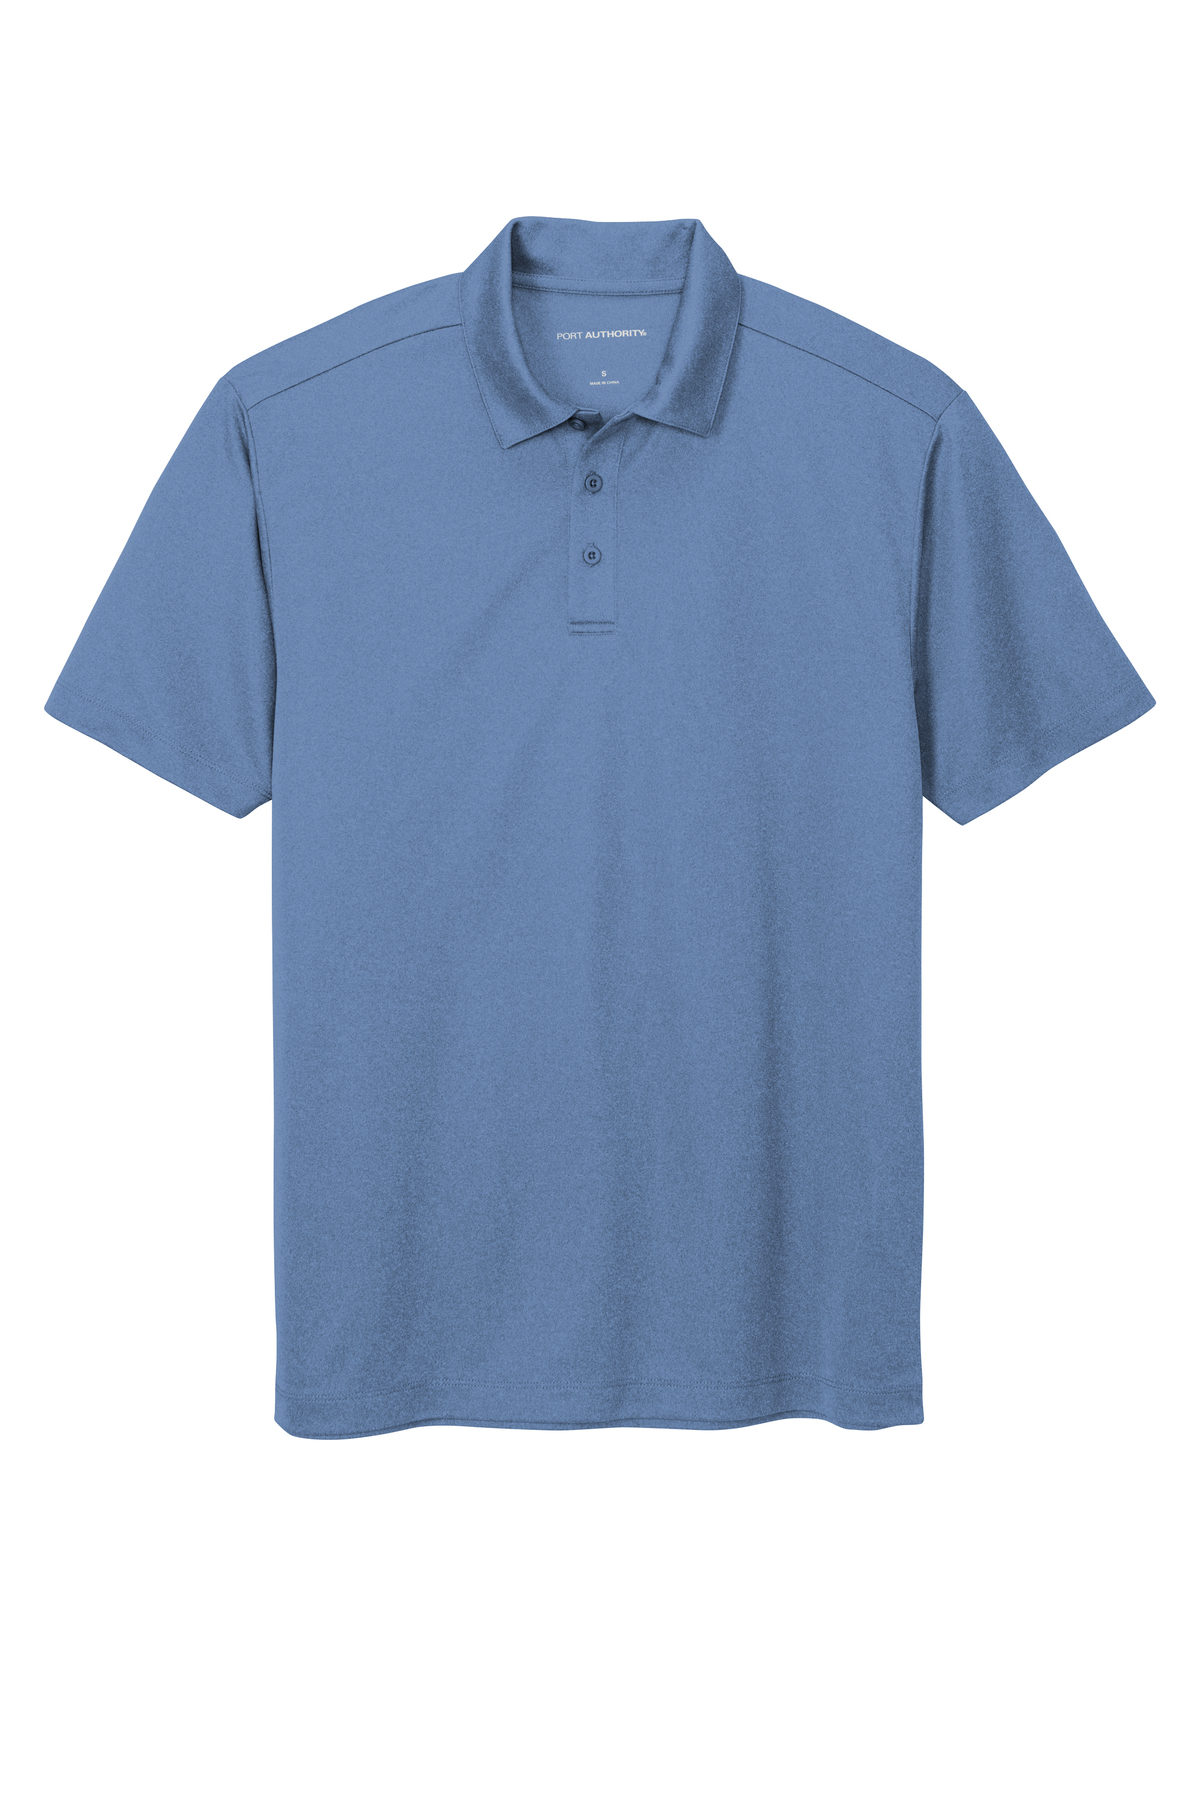 Port Authority Heathered Silk Touch Performance Polo | Product | SanMar